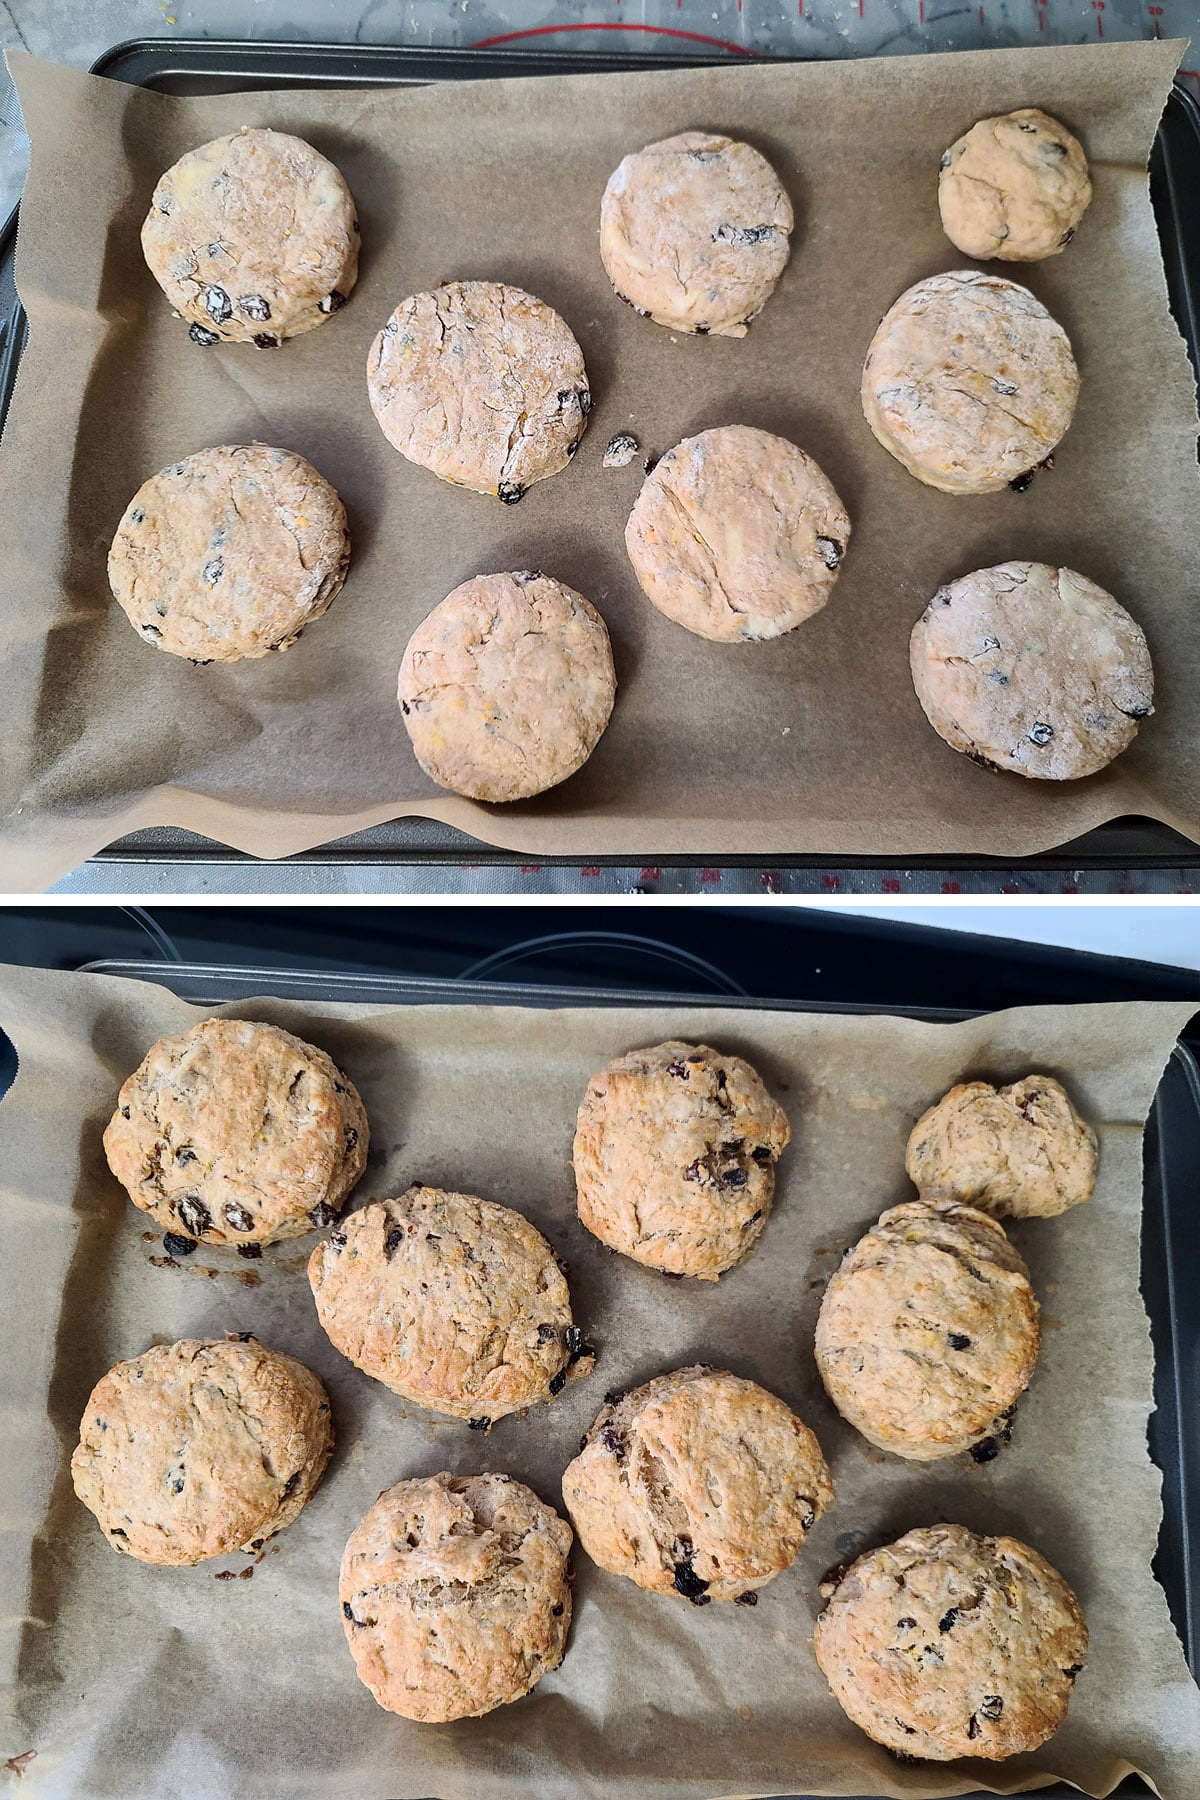 The pan of hot cross scones, before and after baking.